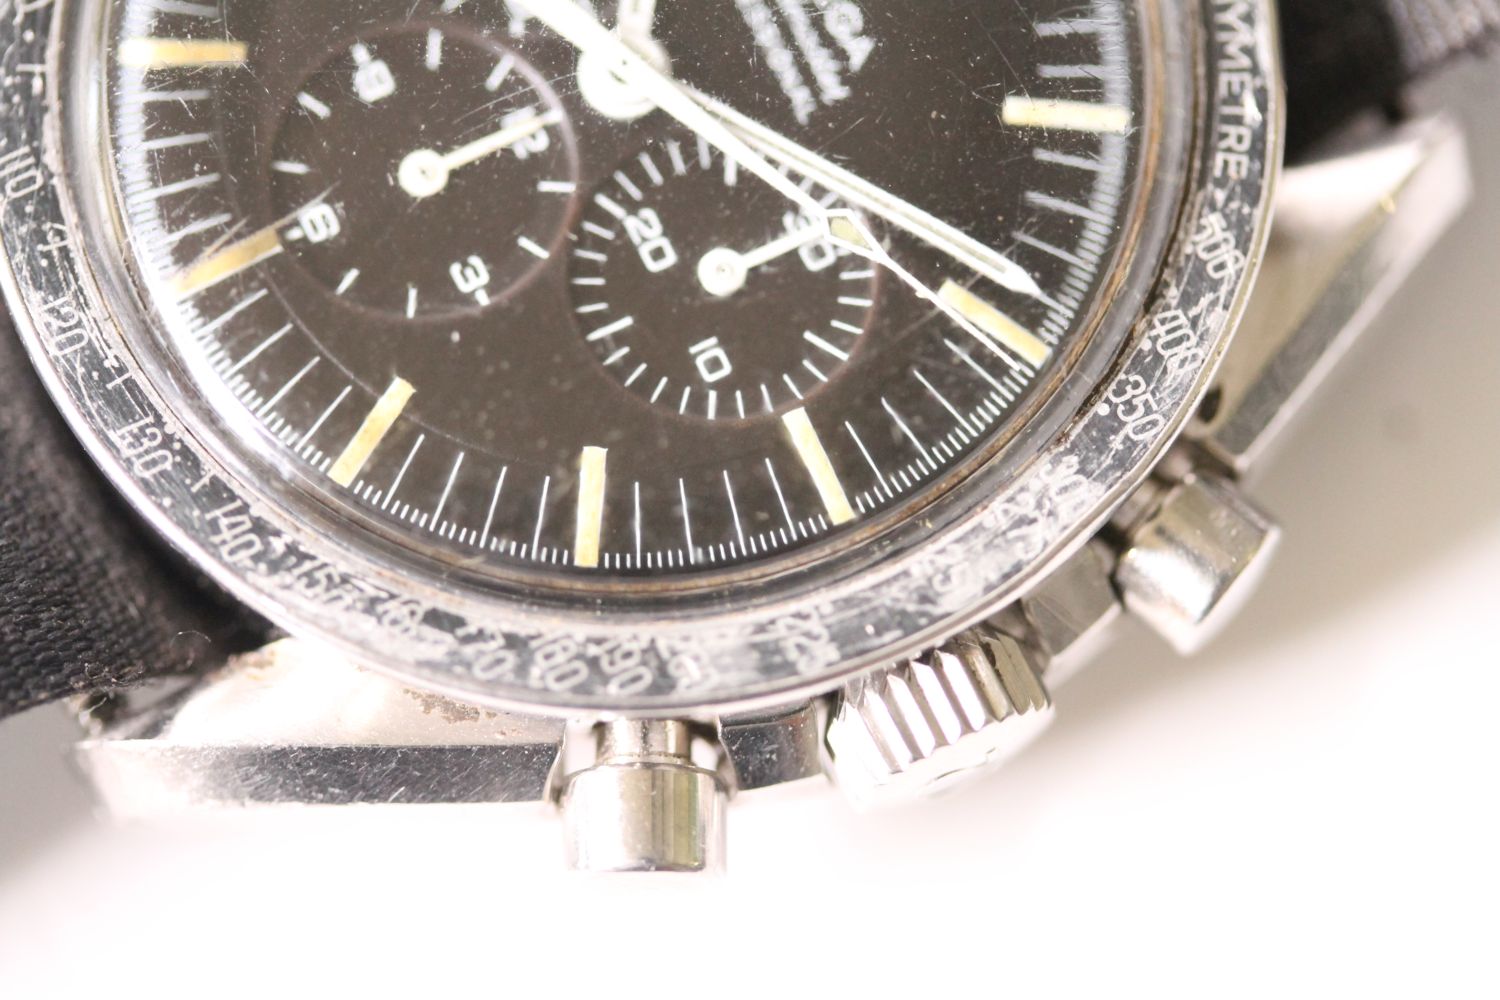 VINTAGE OMEGA SPEEDMASTER PROFESSIONAL 145.012 SP 1968, circular black dial with baton hour markers, - Image 4 of 9